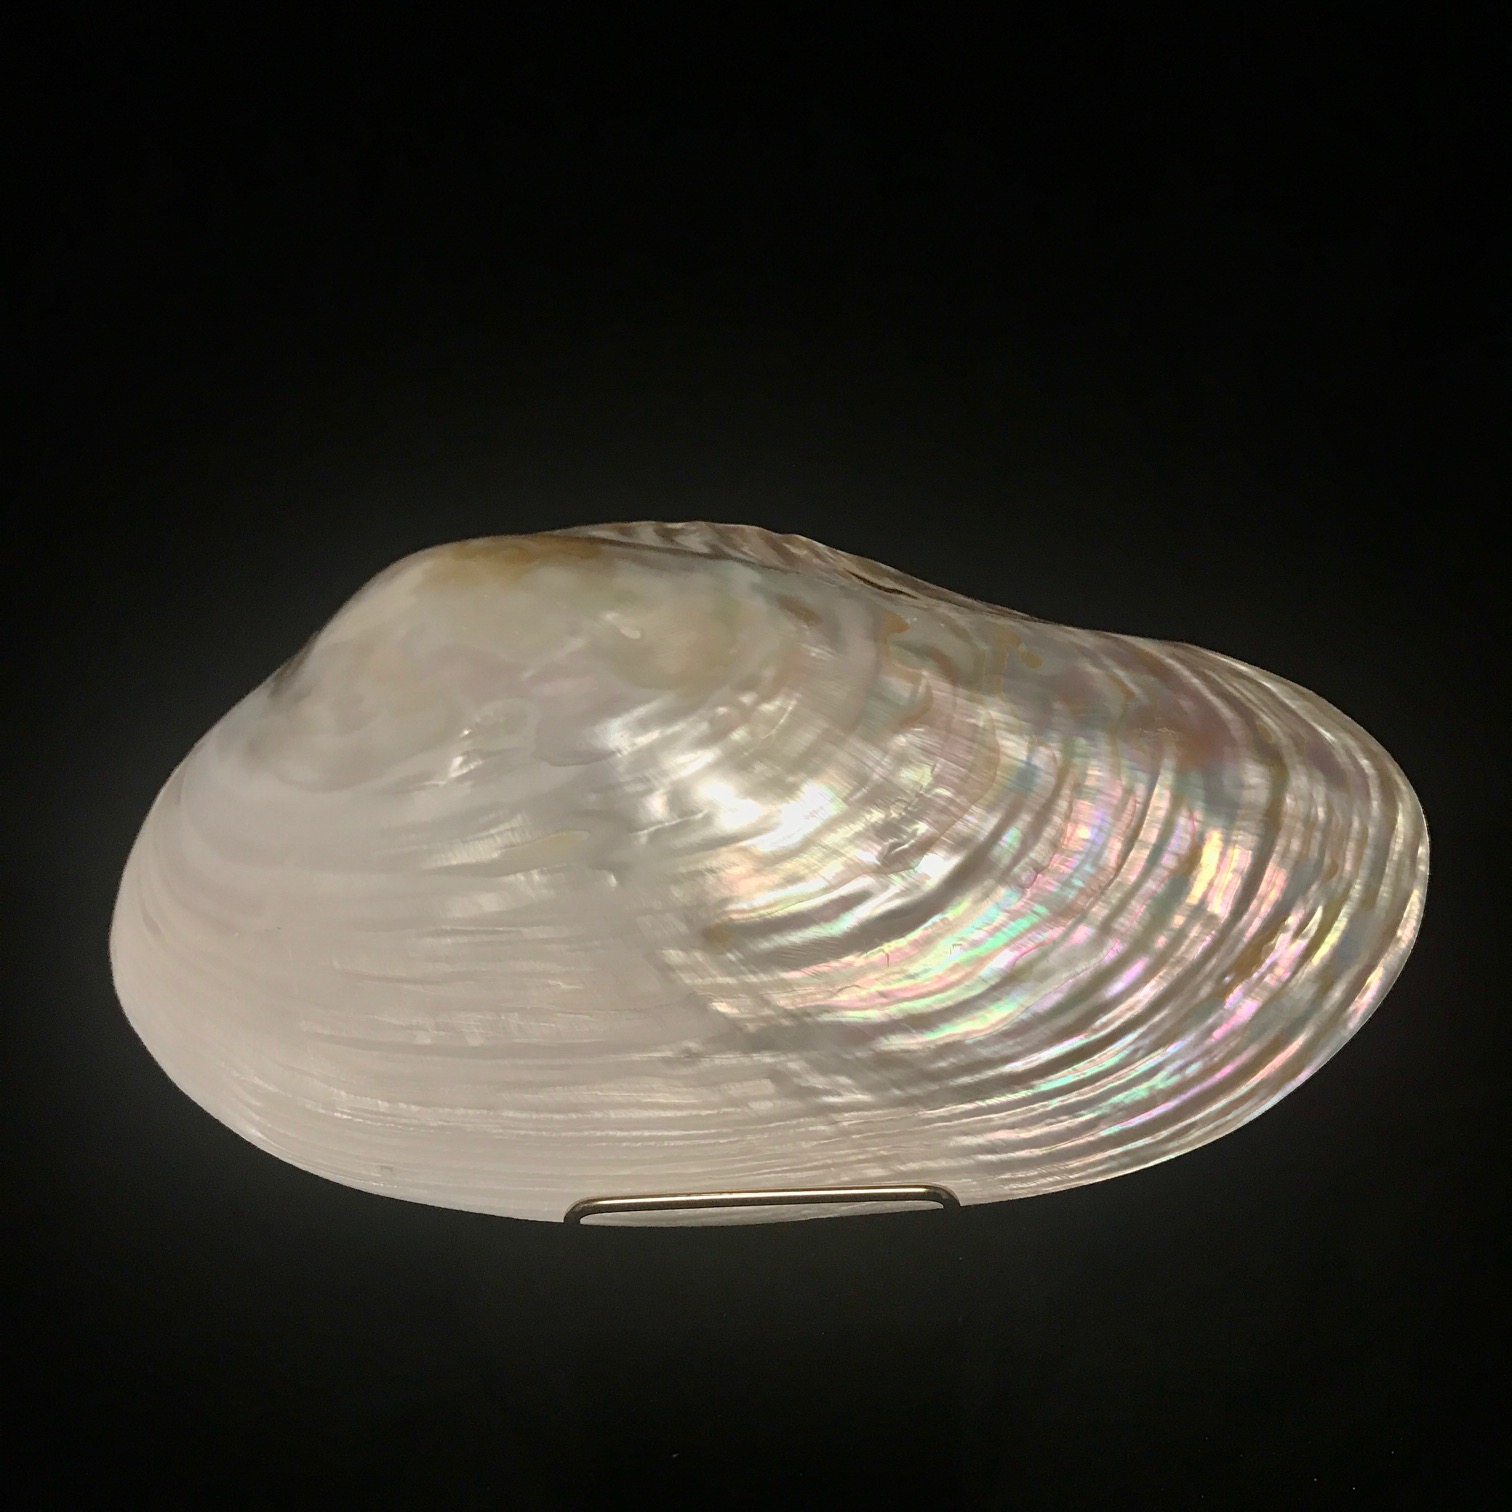 Gorgeous, iridescent clam plate, available to purchase at natur.